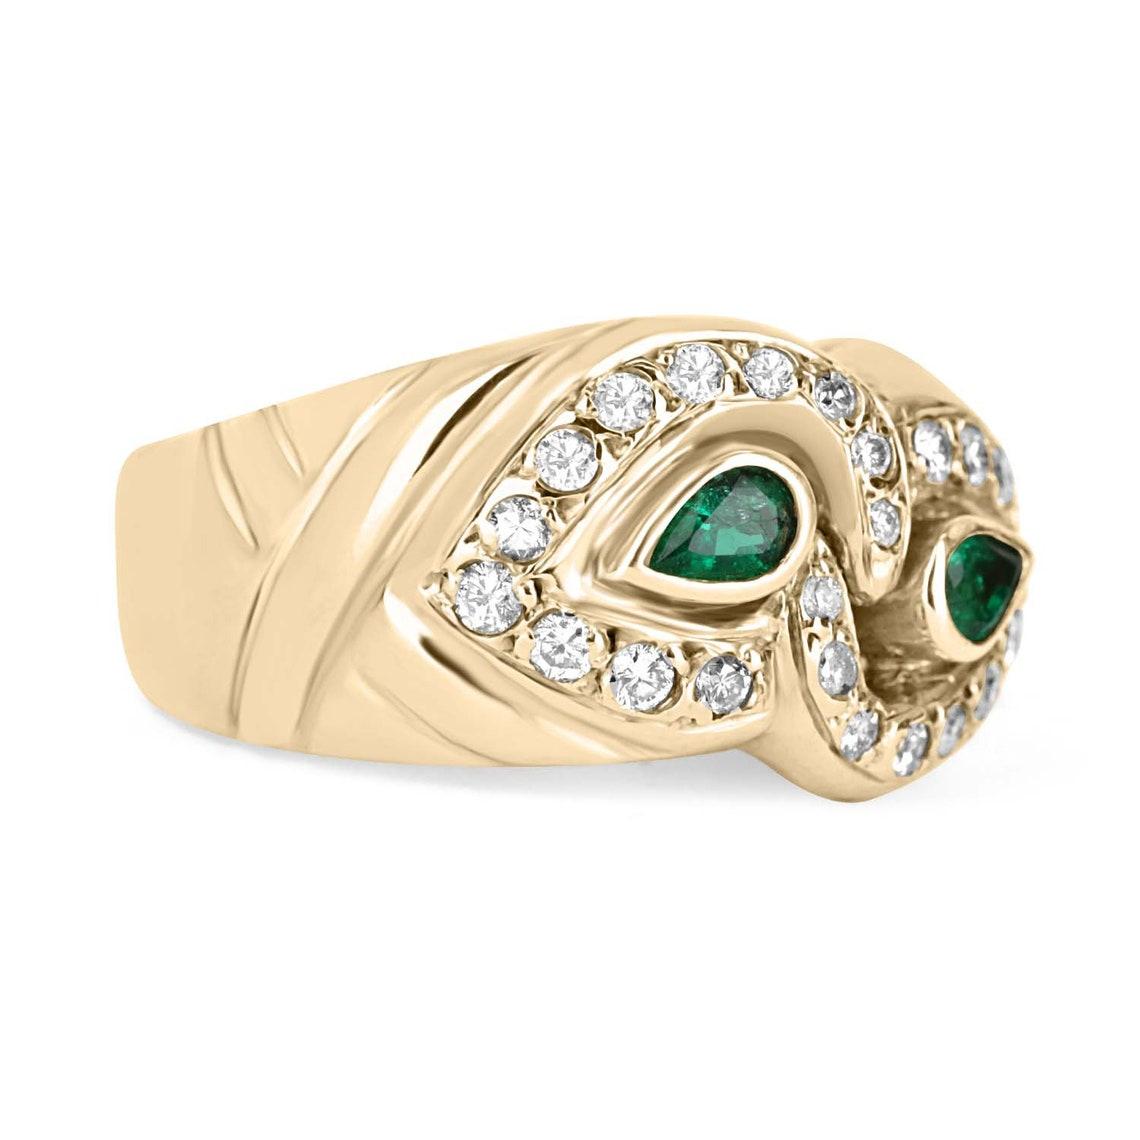 Featured here is an impressive natural pear Colombian emerald and diamond cocktail ring 18K. This unique piece is full of decadence and beauty. The smoothly grooved lines of this ring provide a whimsical, sophisticated look while achieving a